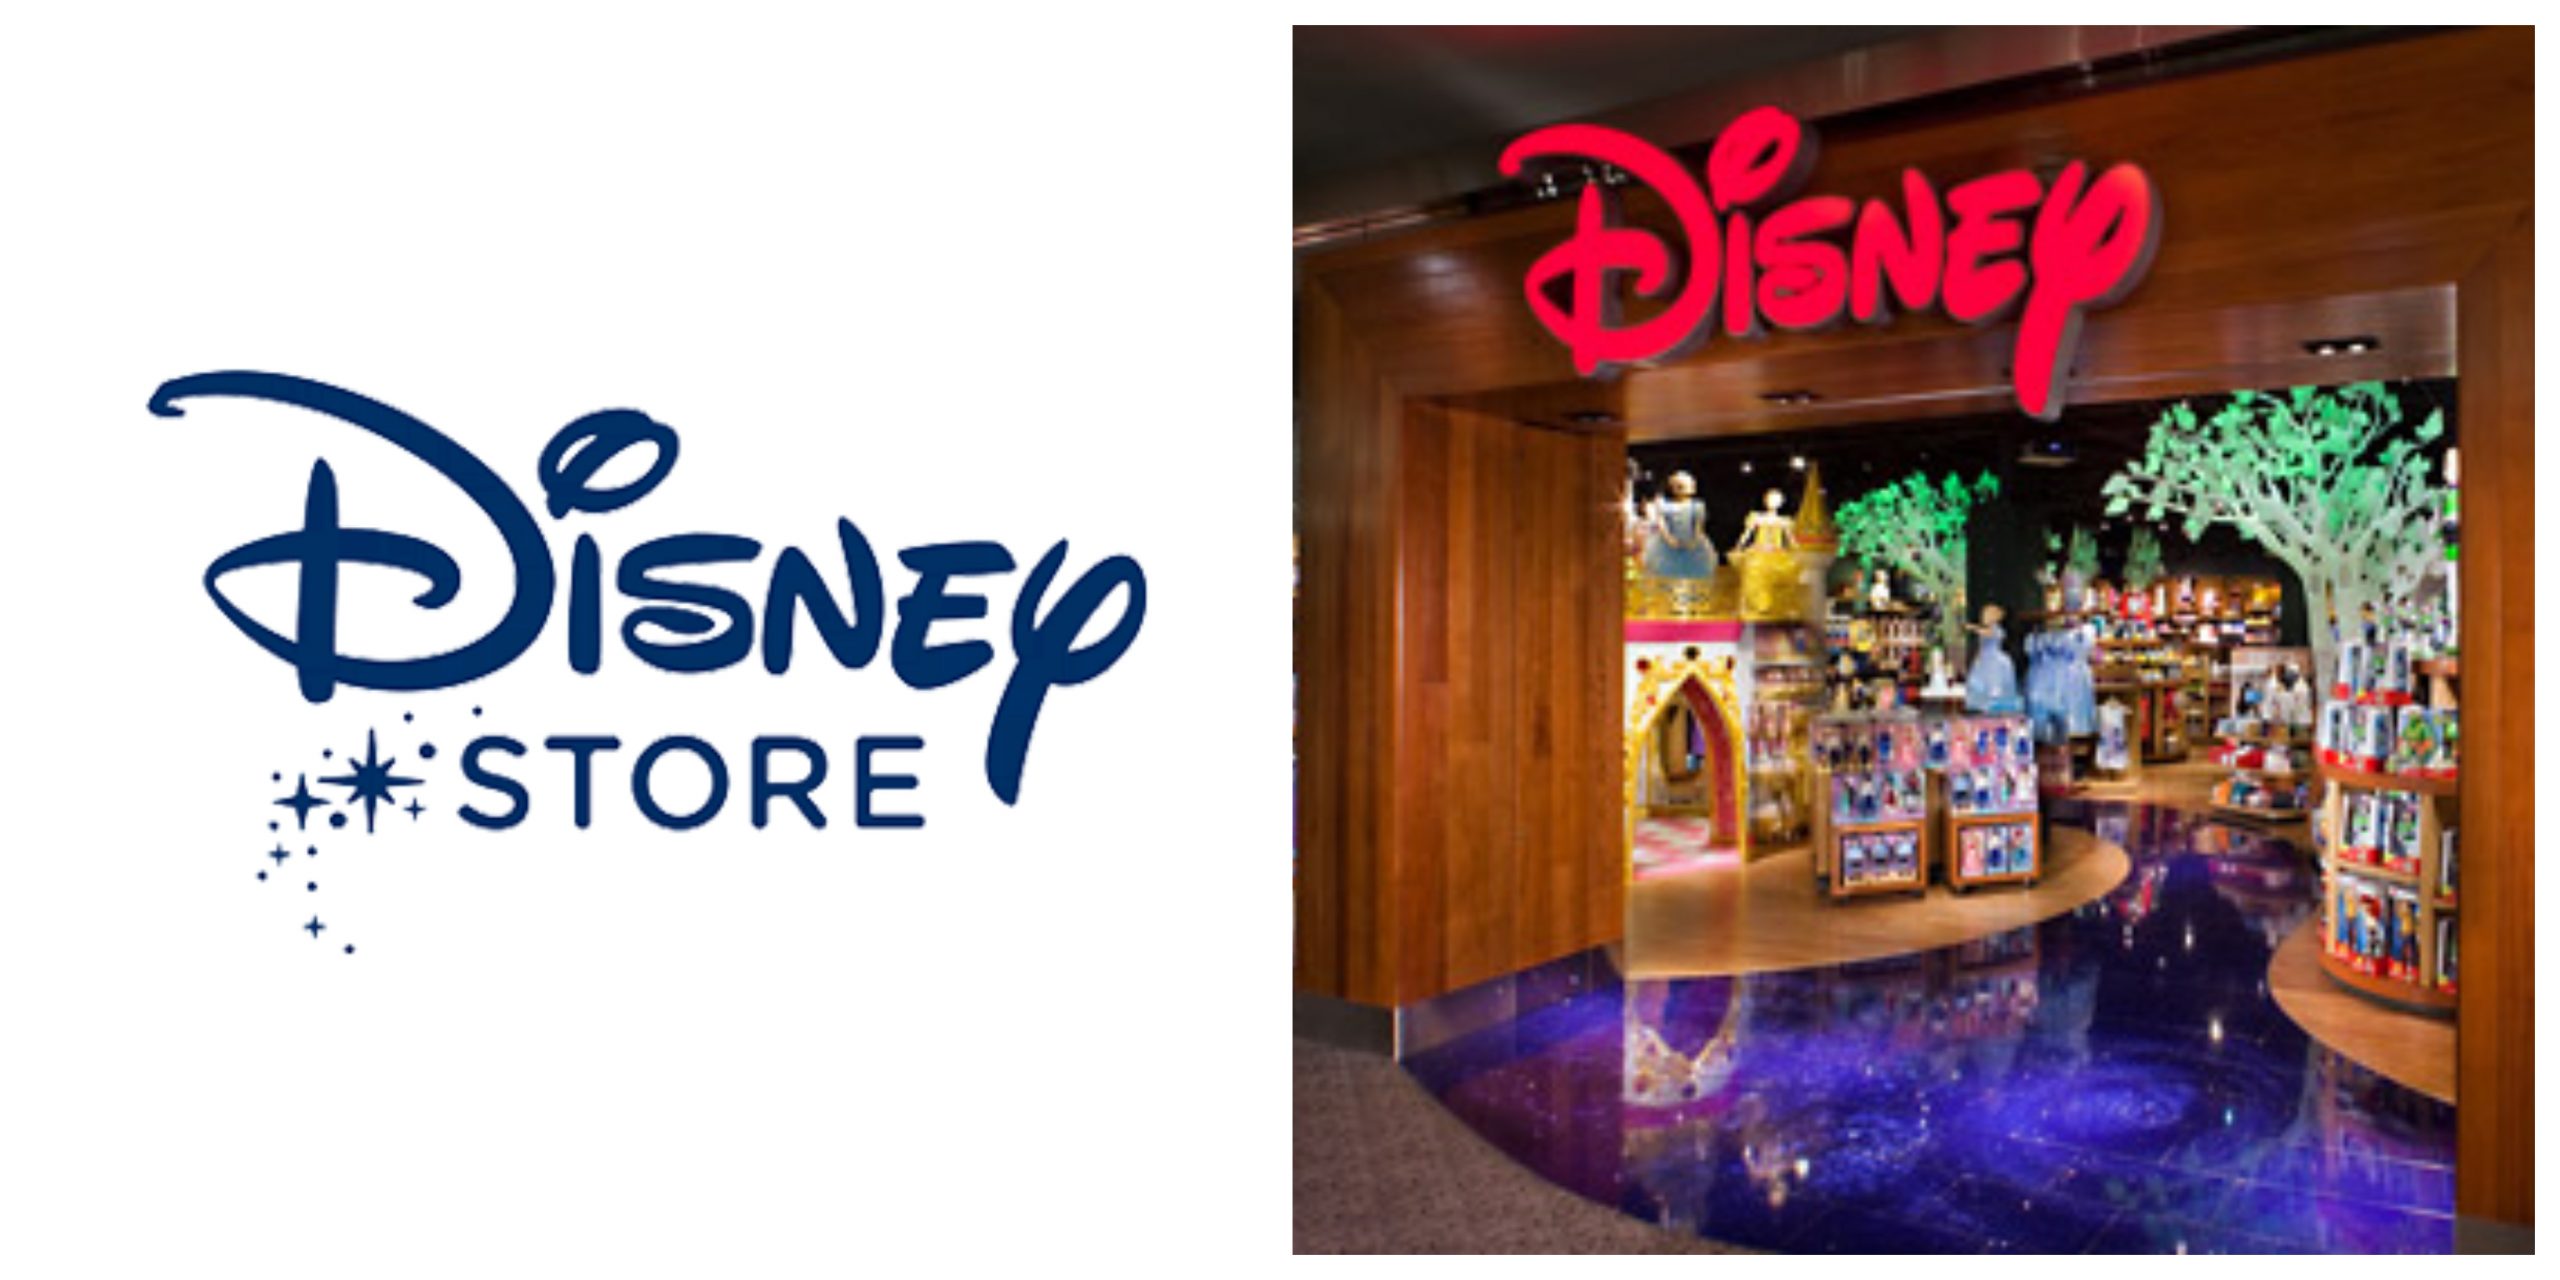 Disney Store releases update on store reopenings including health and safety measures